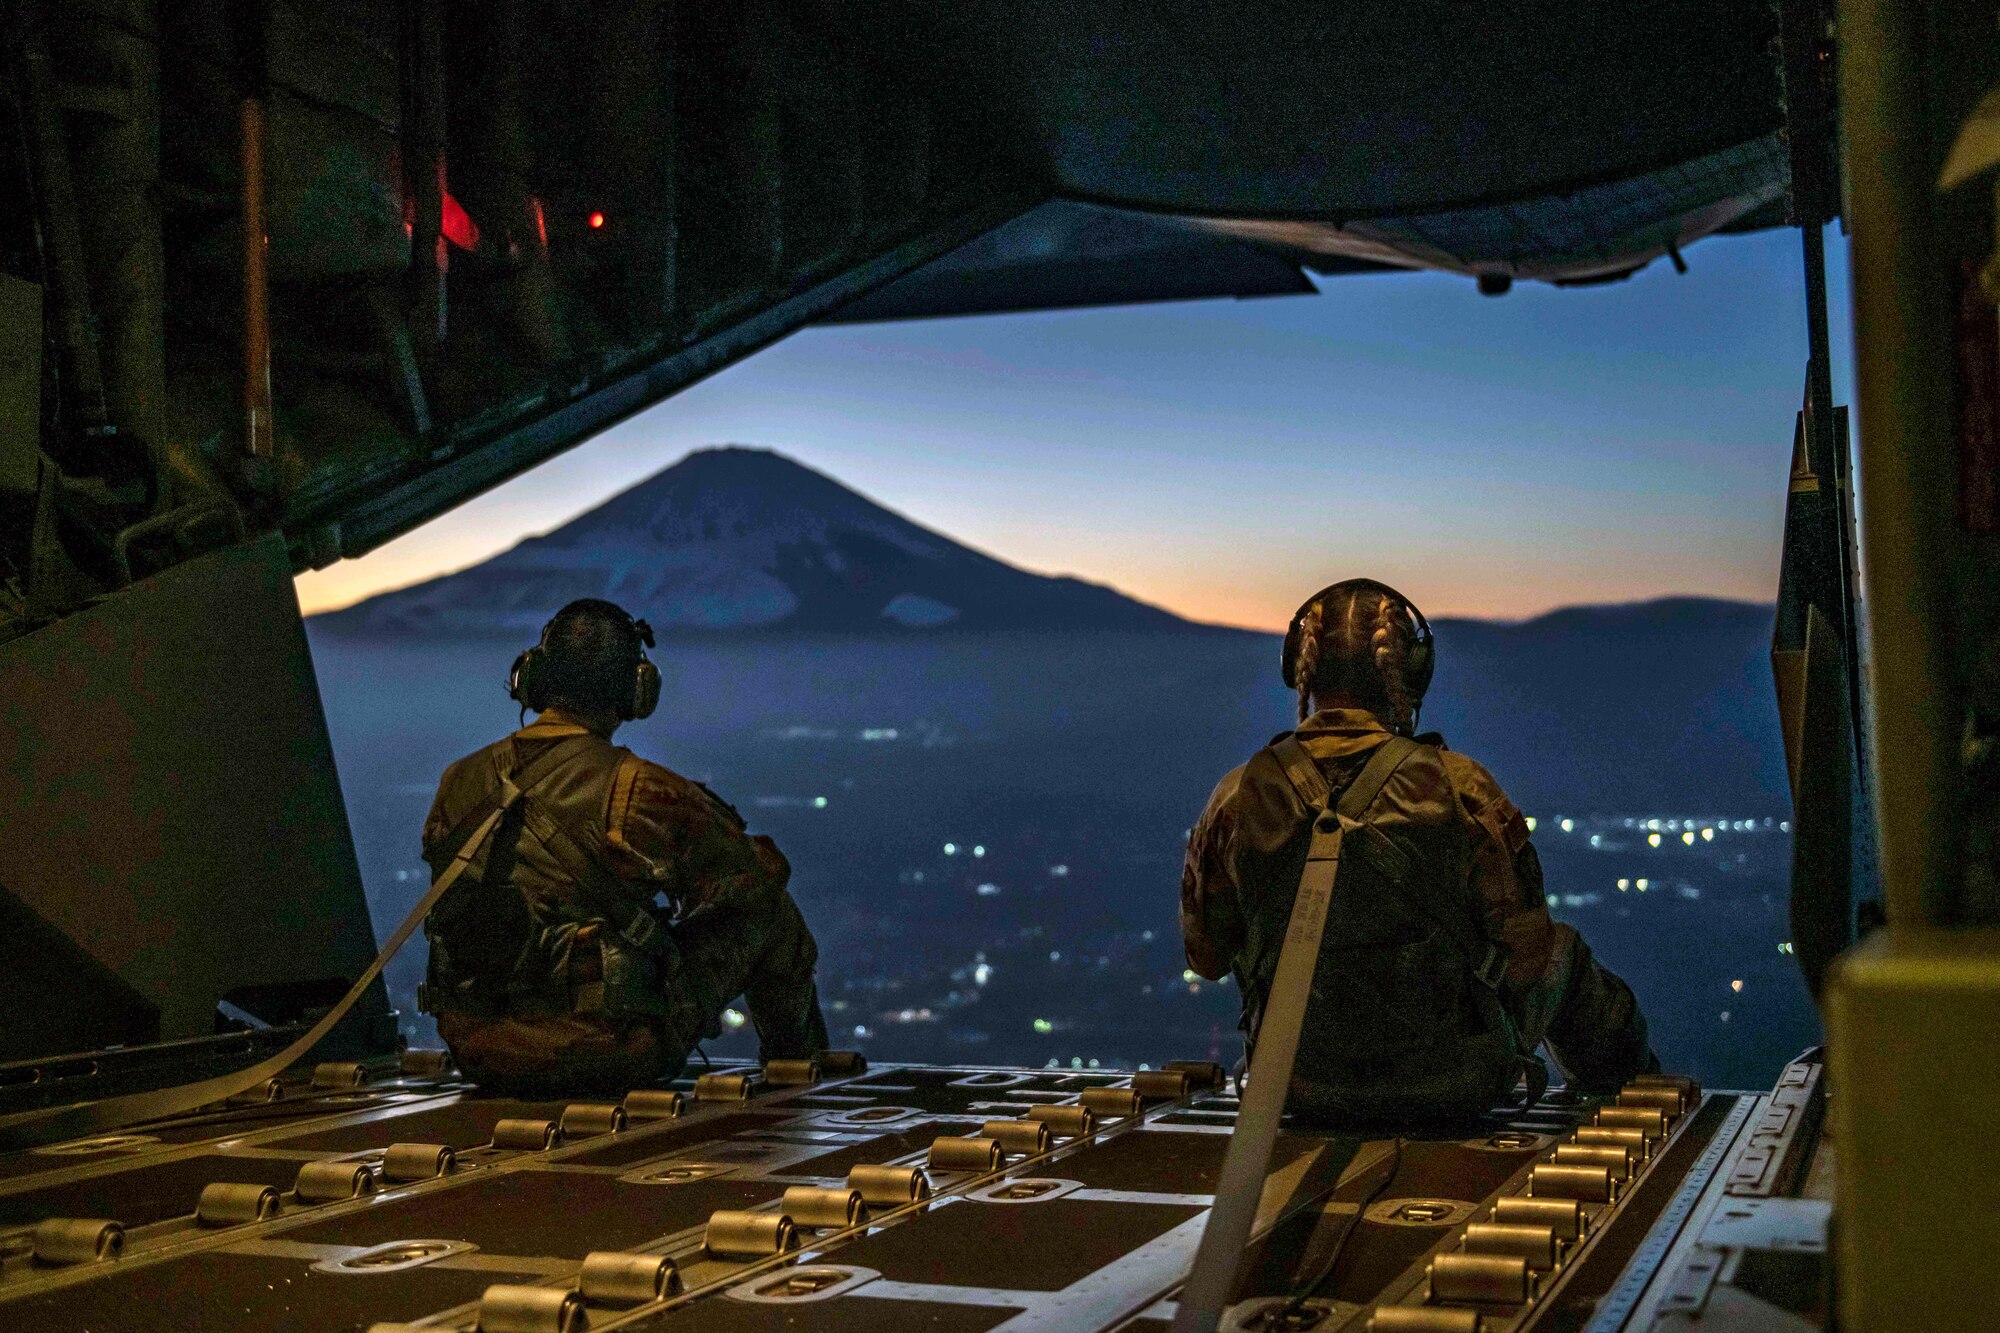 Airmen look out over Mount Fuji